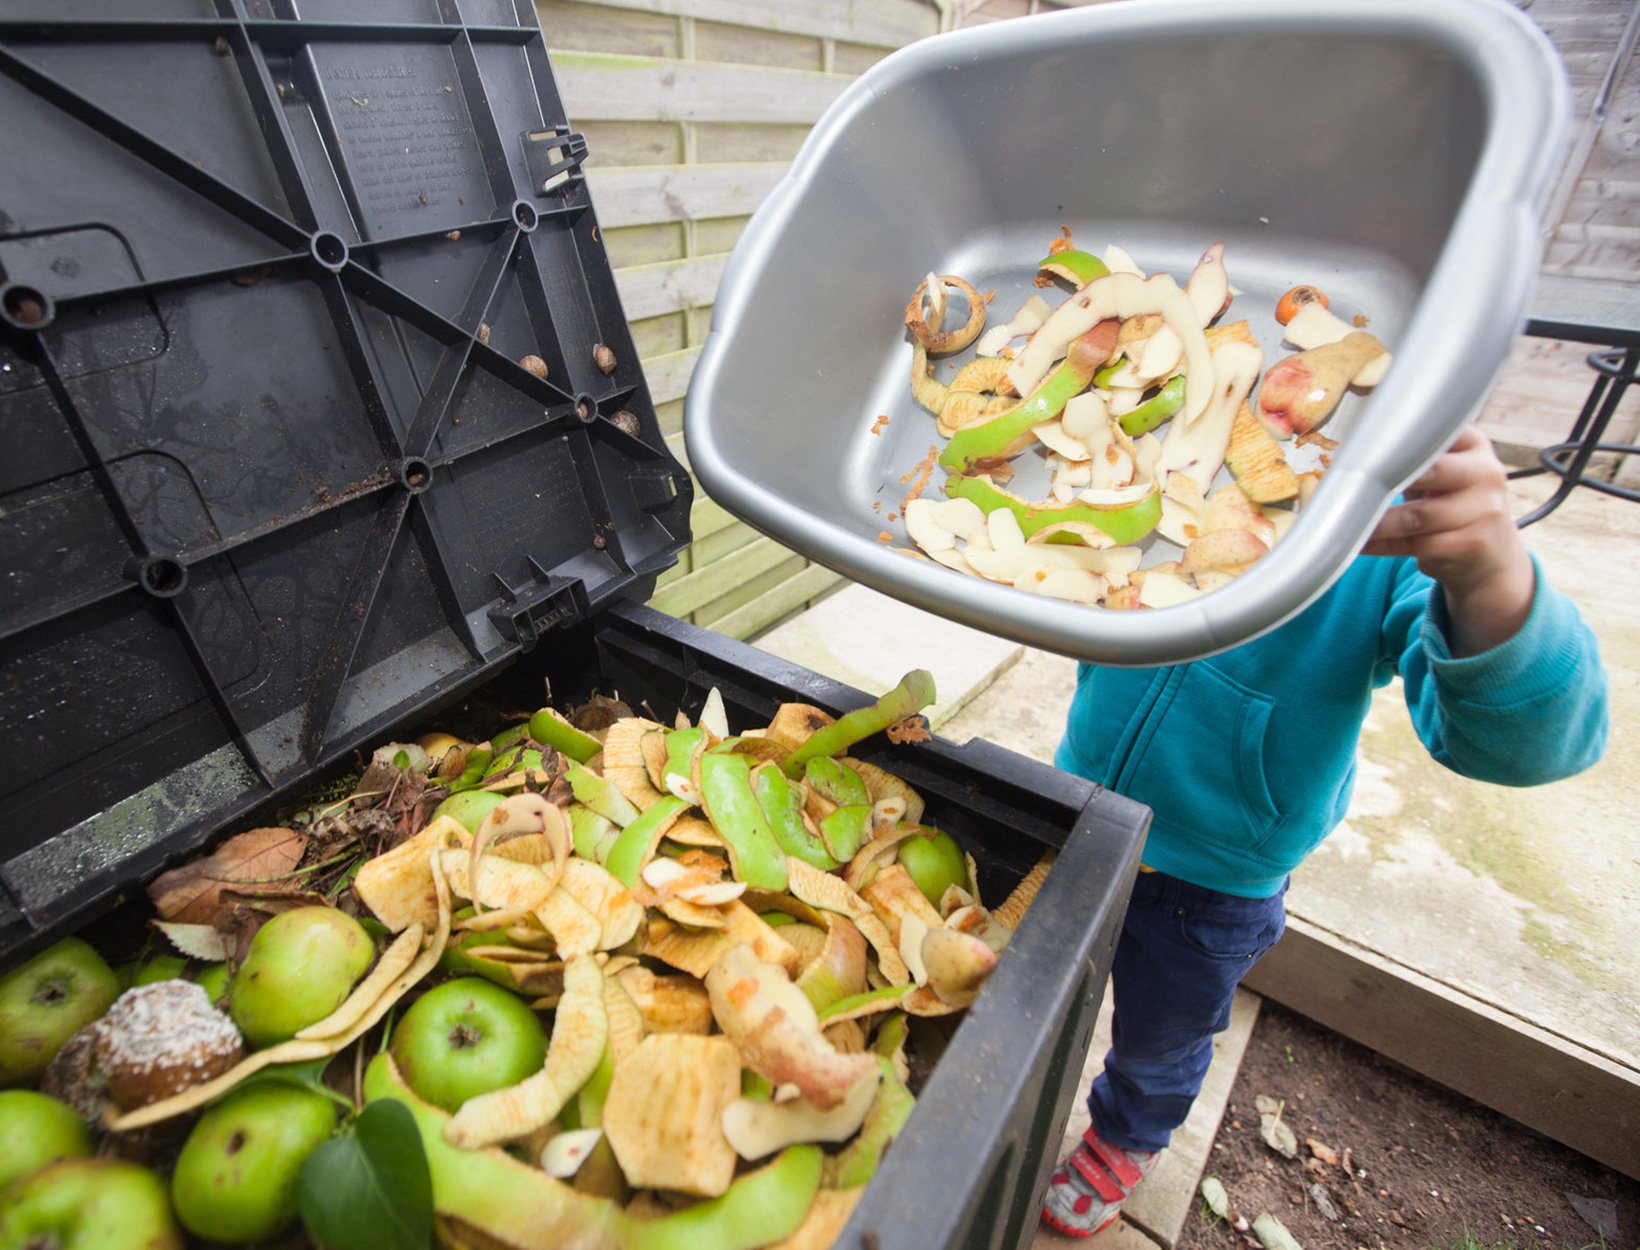 Grocery Stores Get Mostly Mediocre Scores on Their Food Waste Efforts